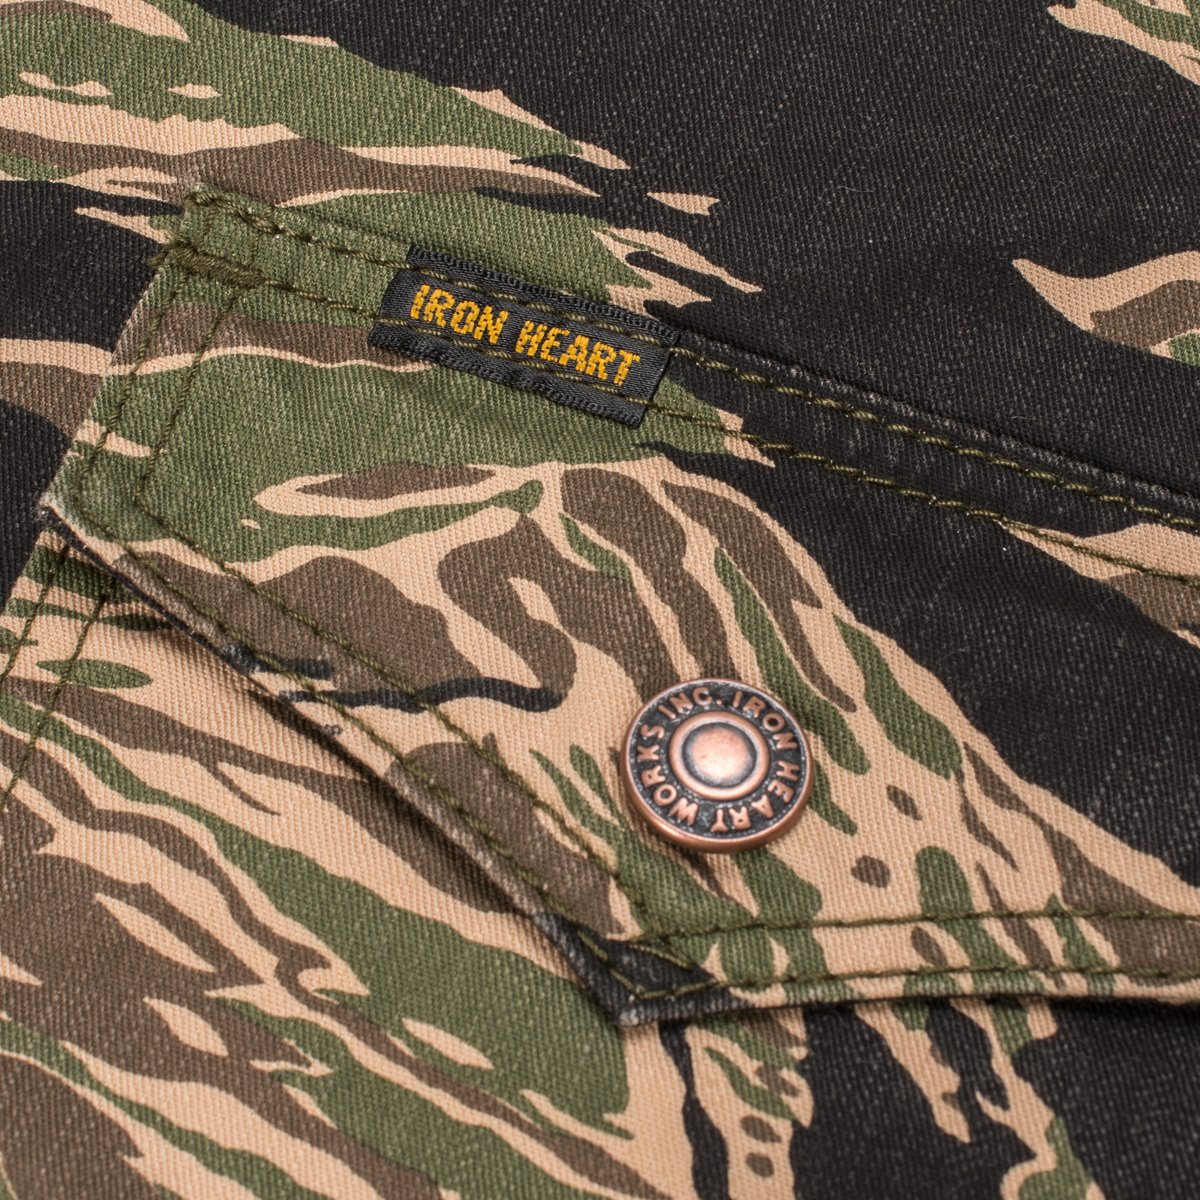 Green Tiger Stripe Camouflage CPO Shirt. Made in Japan.